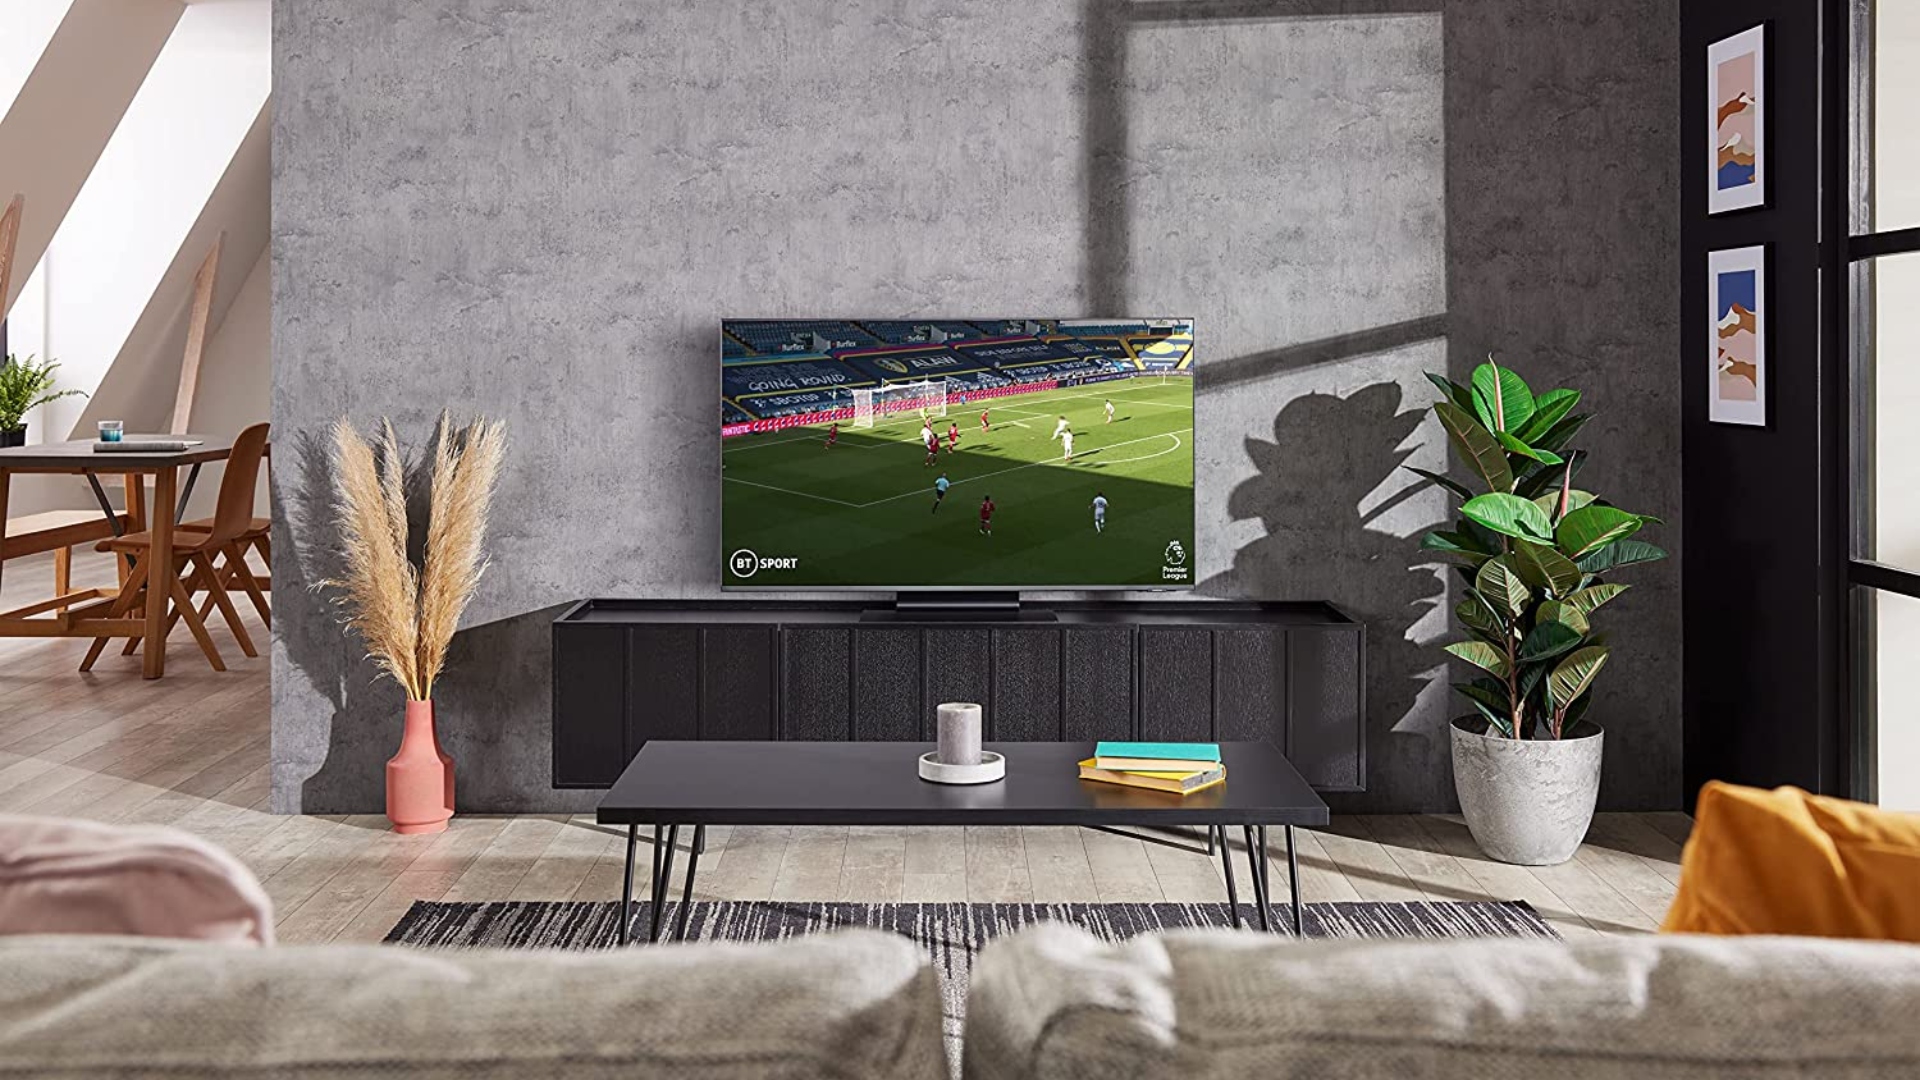 This Samsung gaming TV is 50% off for Amazon Prime Day